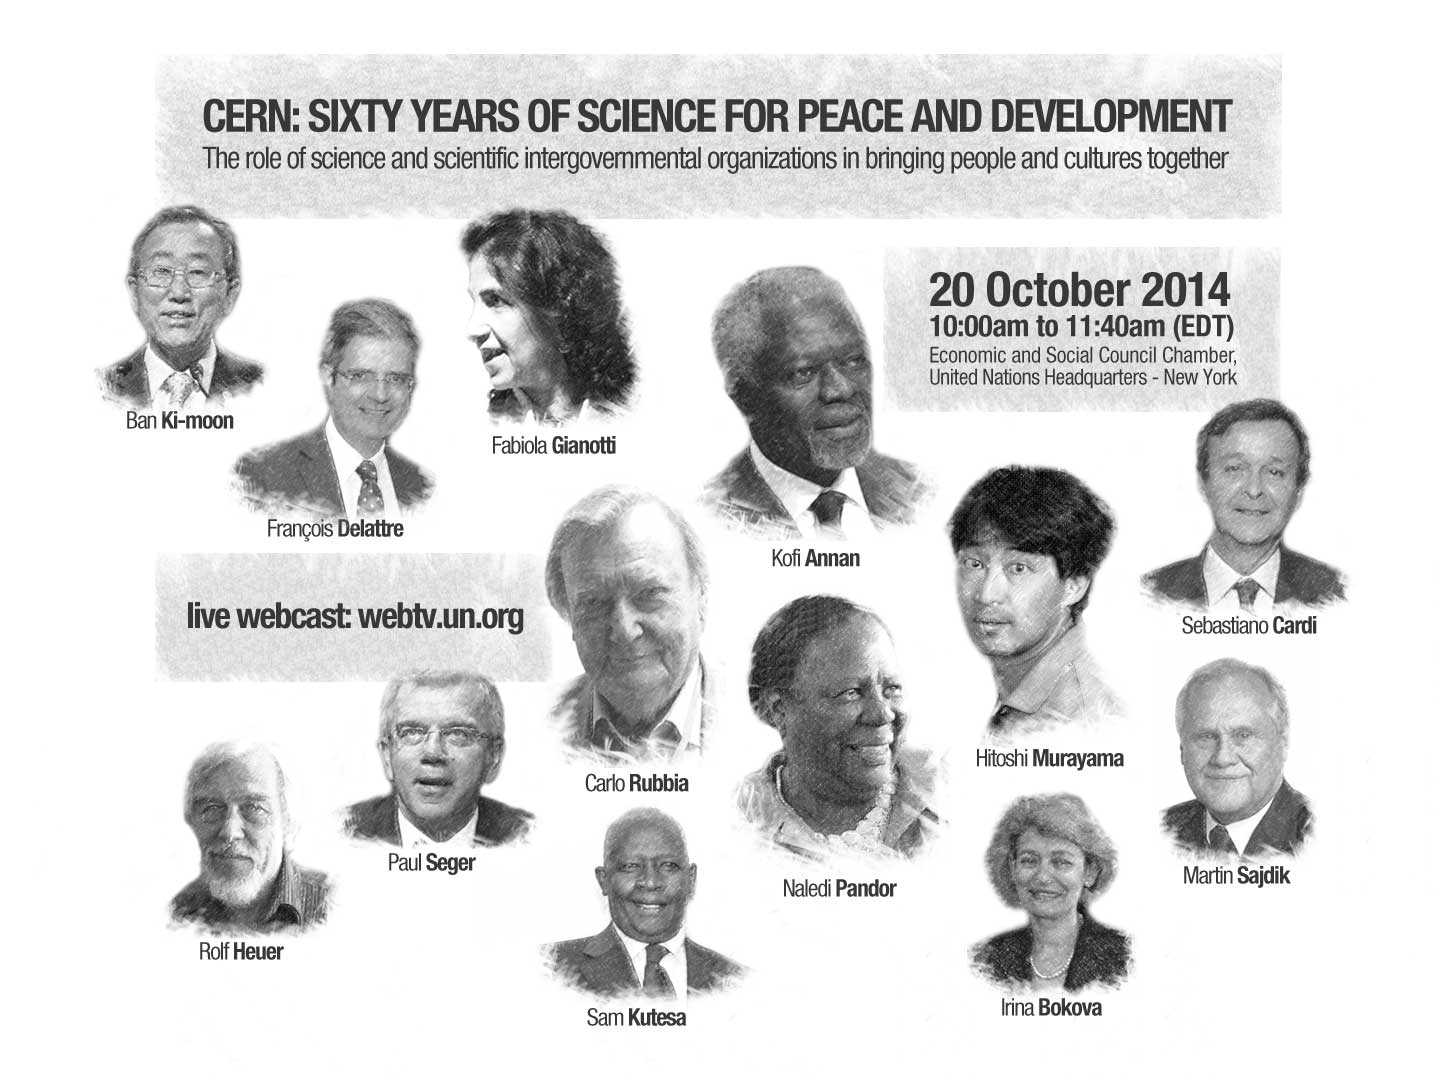 Celebrating science for peace and development with the UN